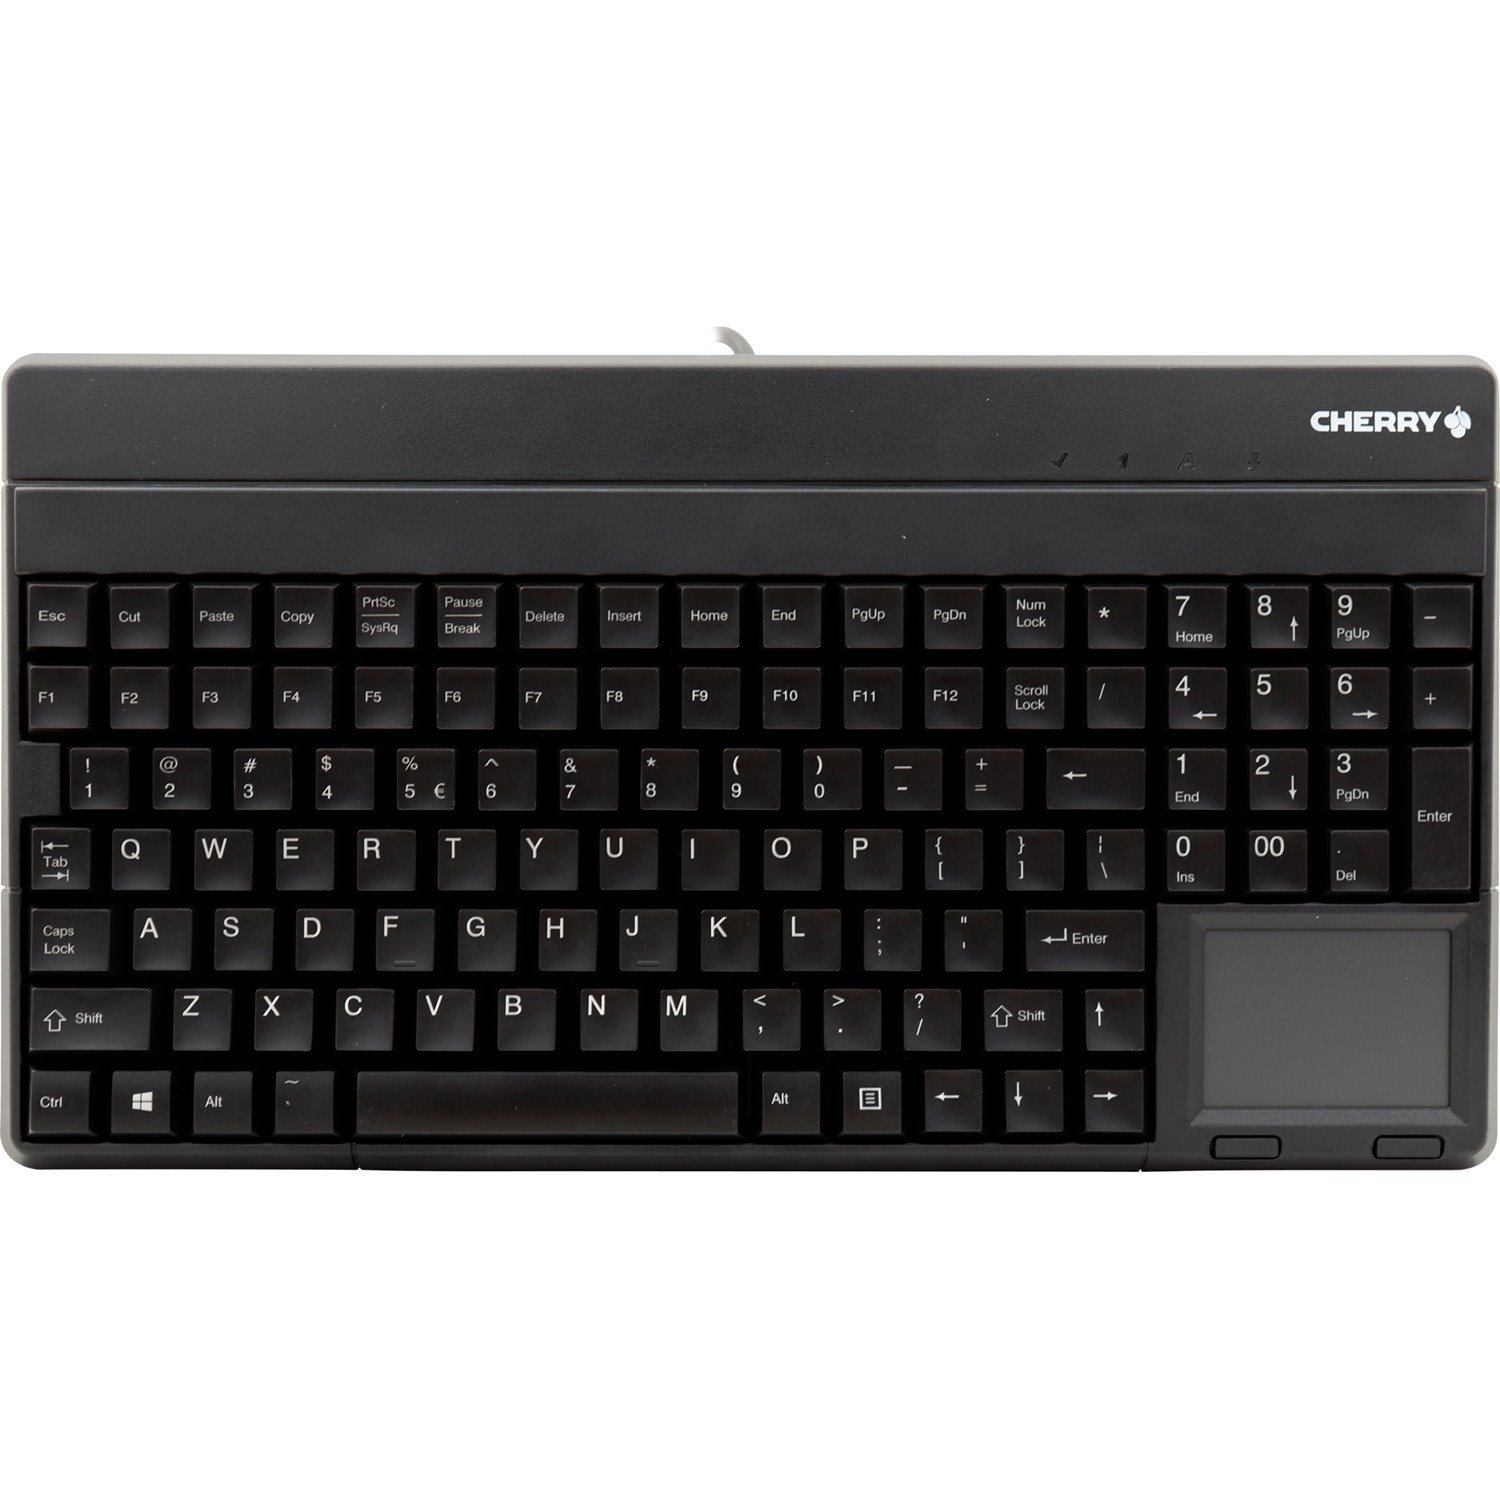 CHERRY G86-62401 Keyboard - Cable Connectivity - USB 2.0 Interface - TouchPad - English (US) - QWERTY Layout - Black